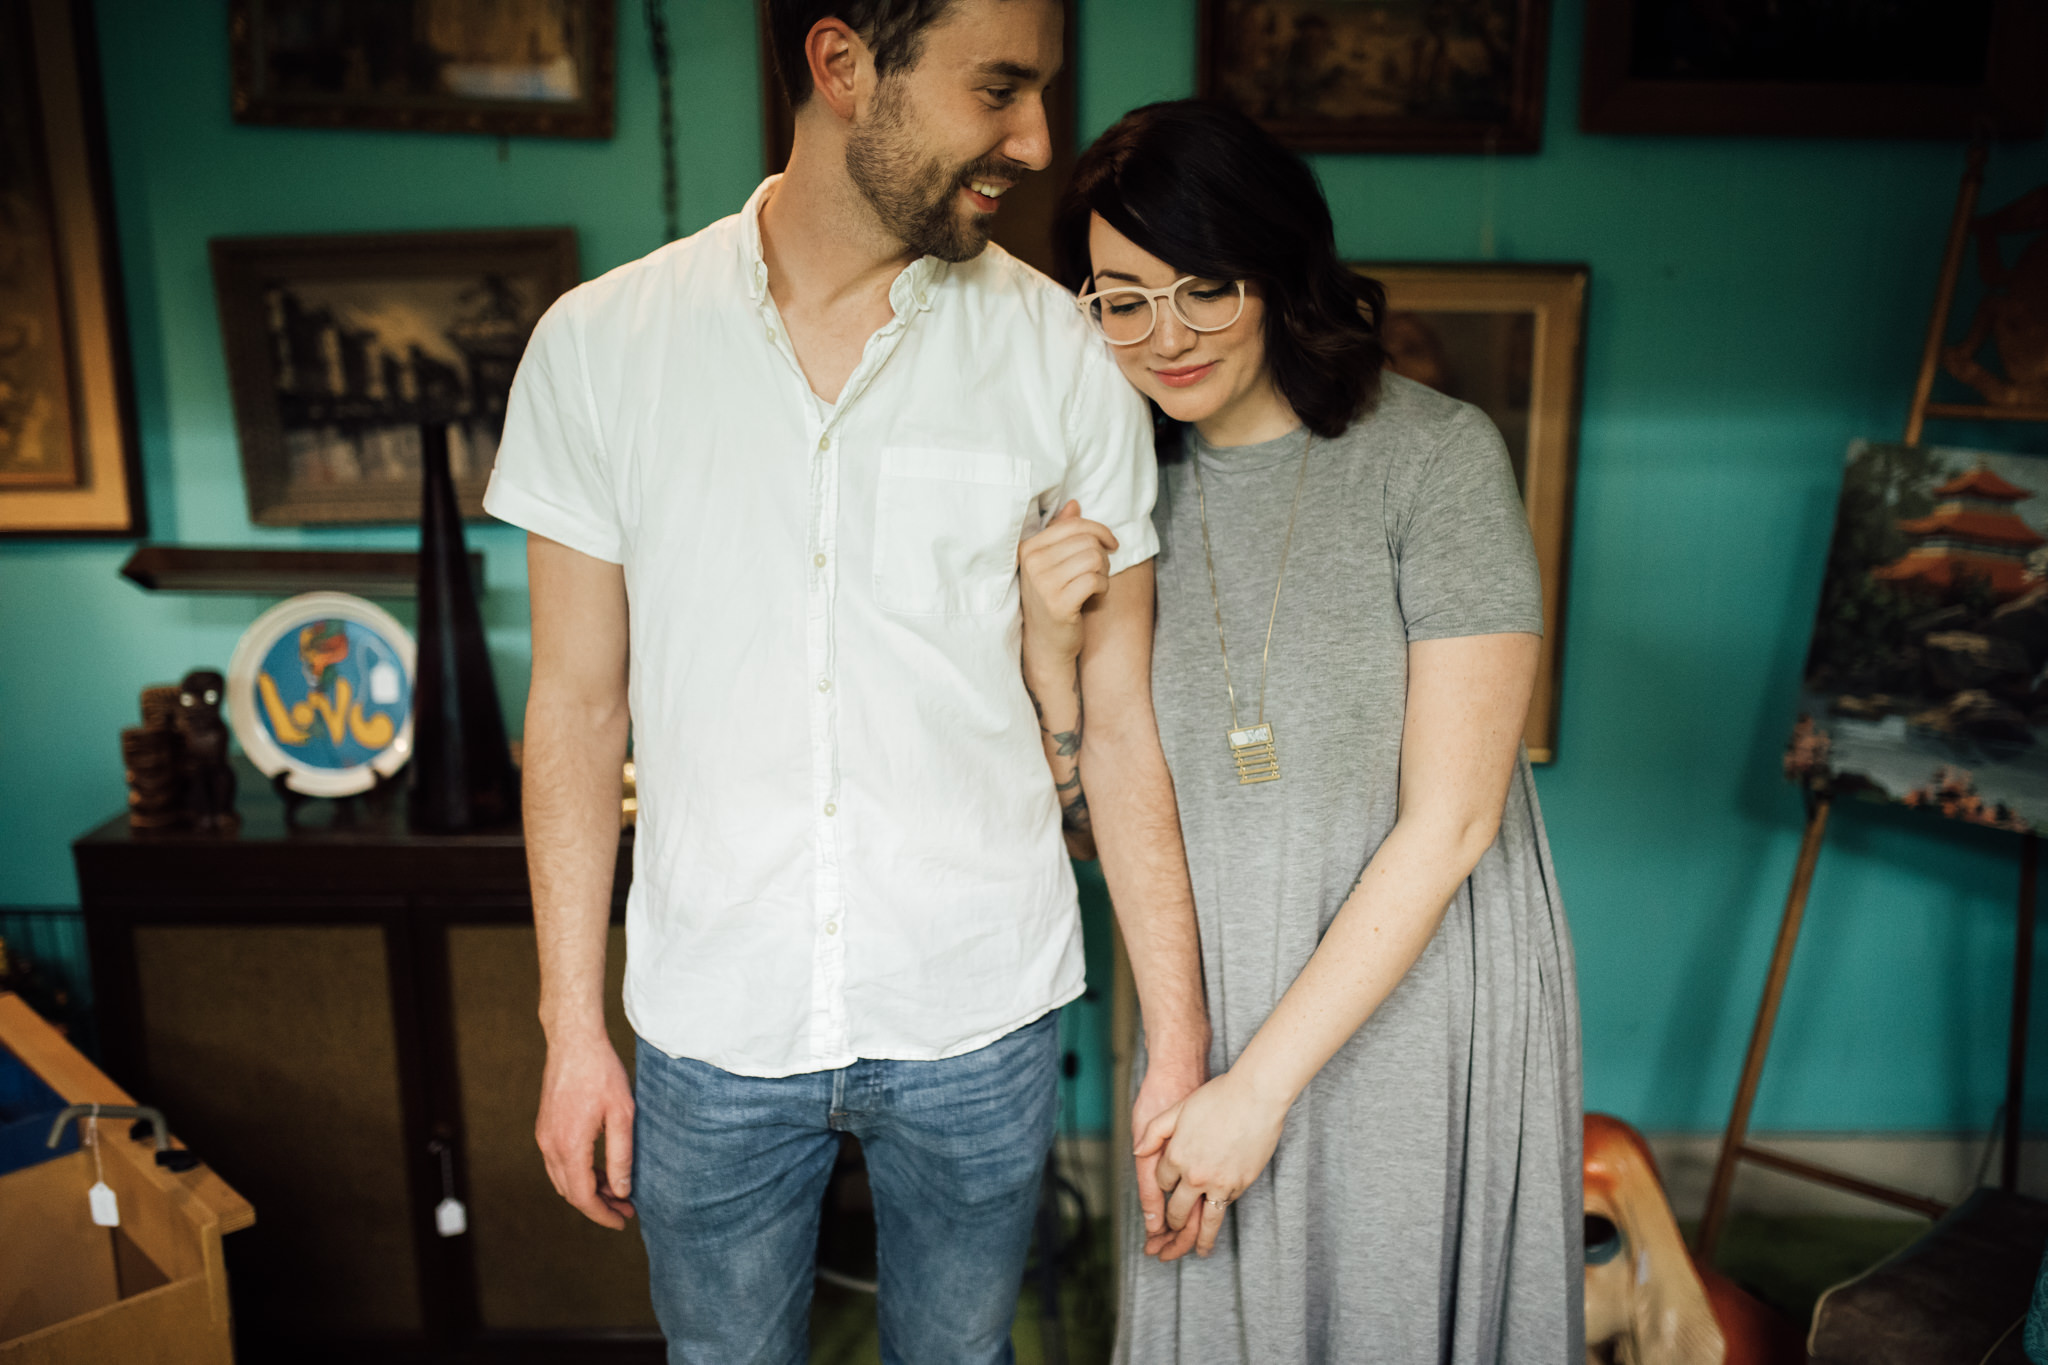 memphis-wedding-photographer-the-warmth-around-you-unique-colorful-engagement-pictures (10 of 80).jpg